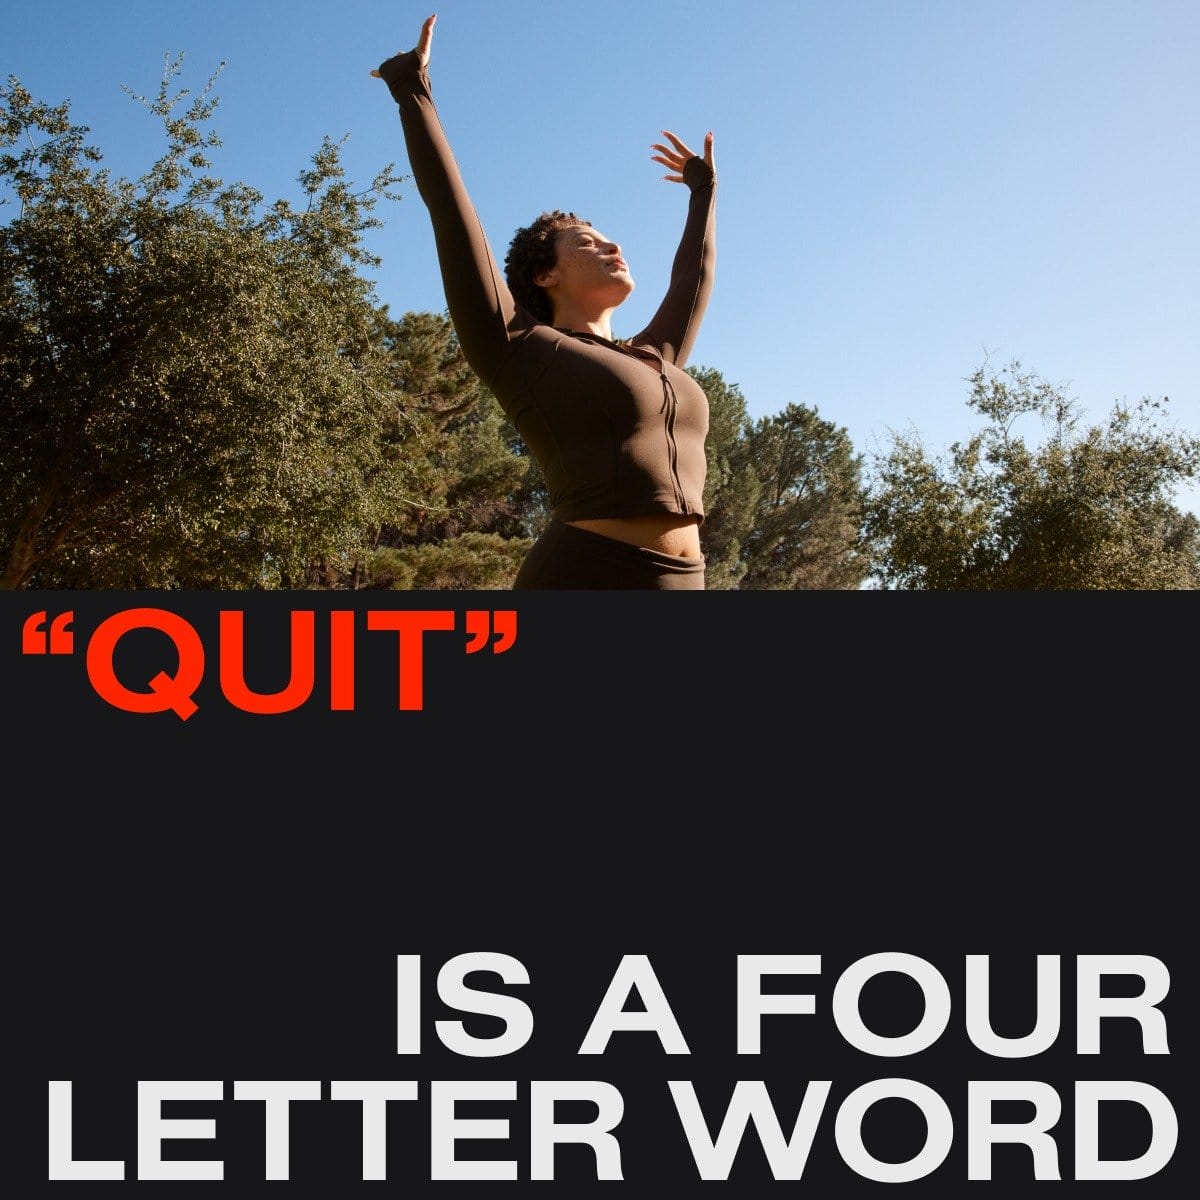 Quit - is a four letter word